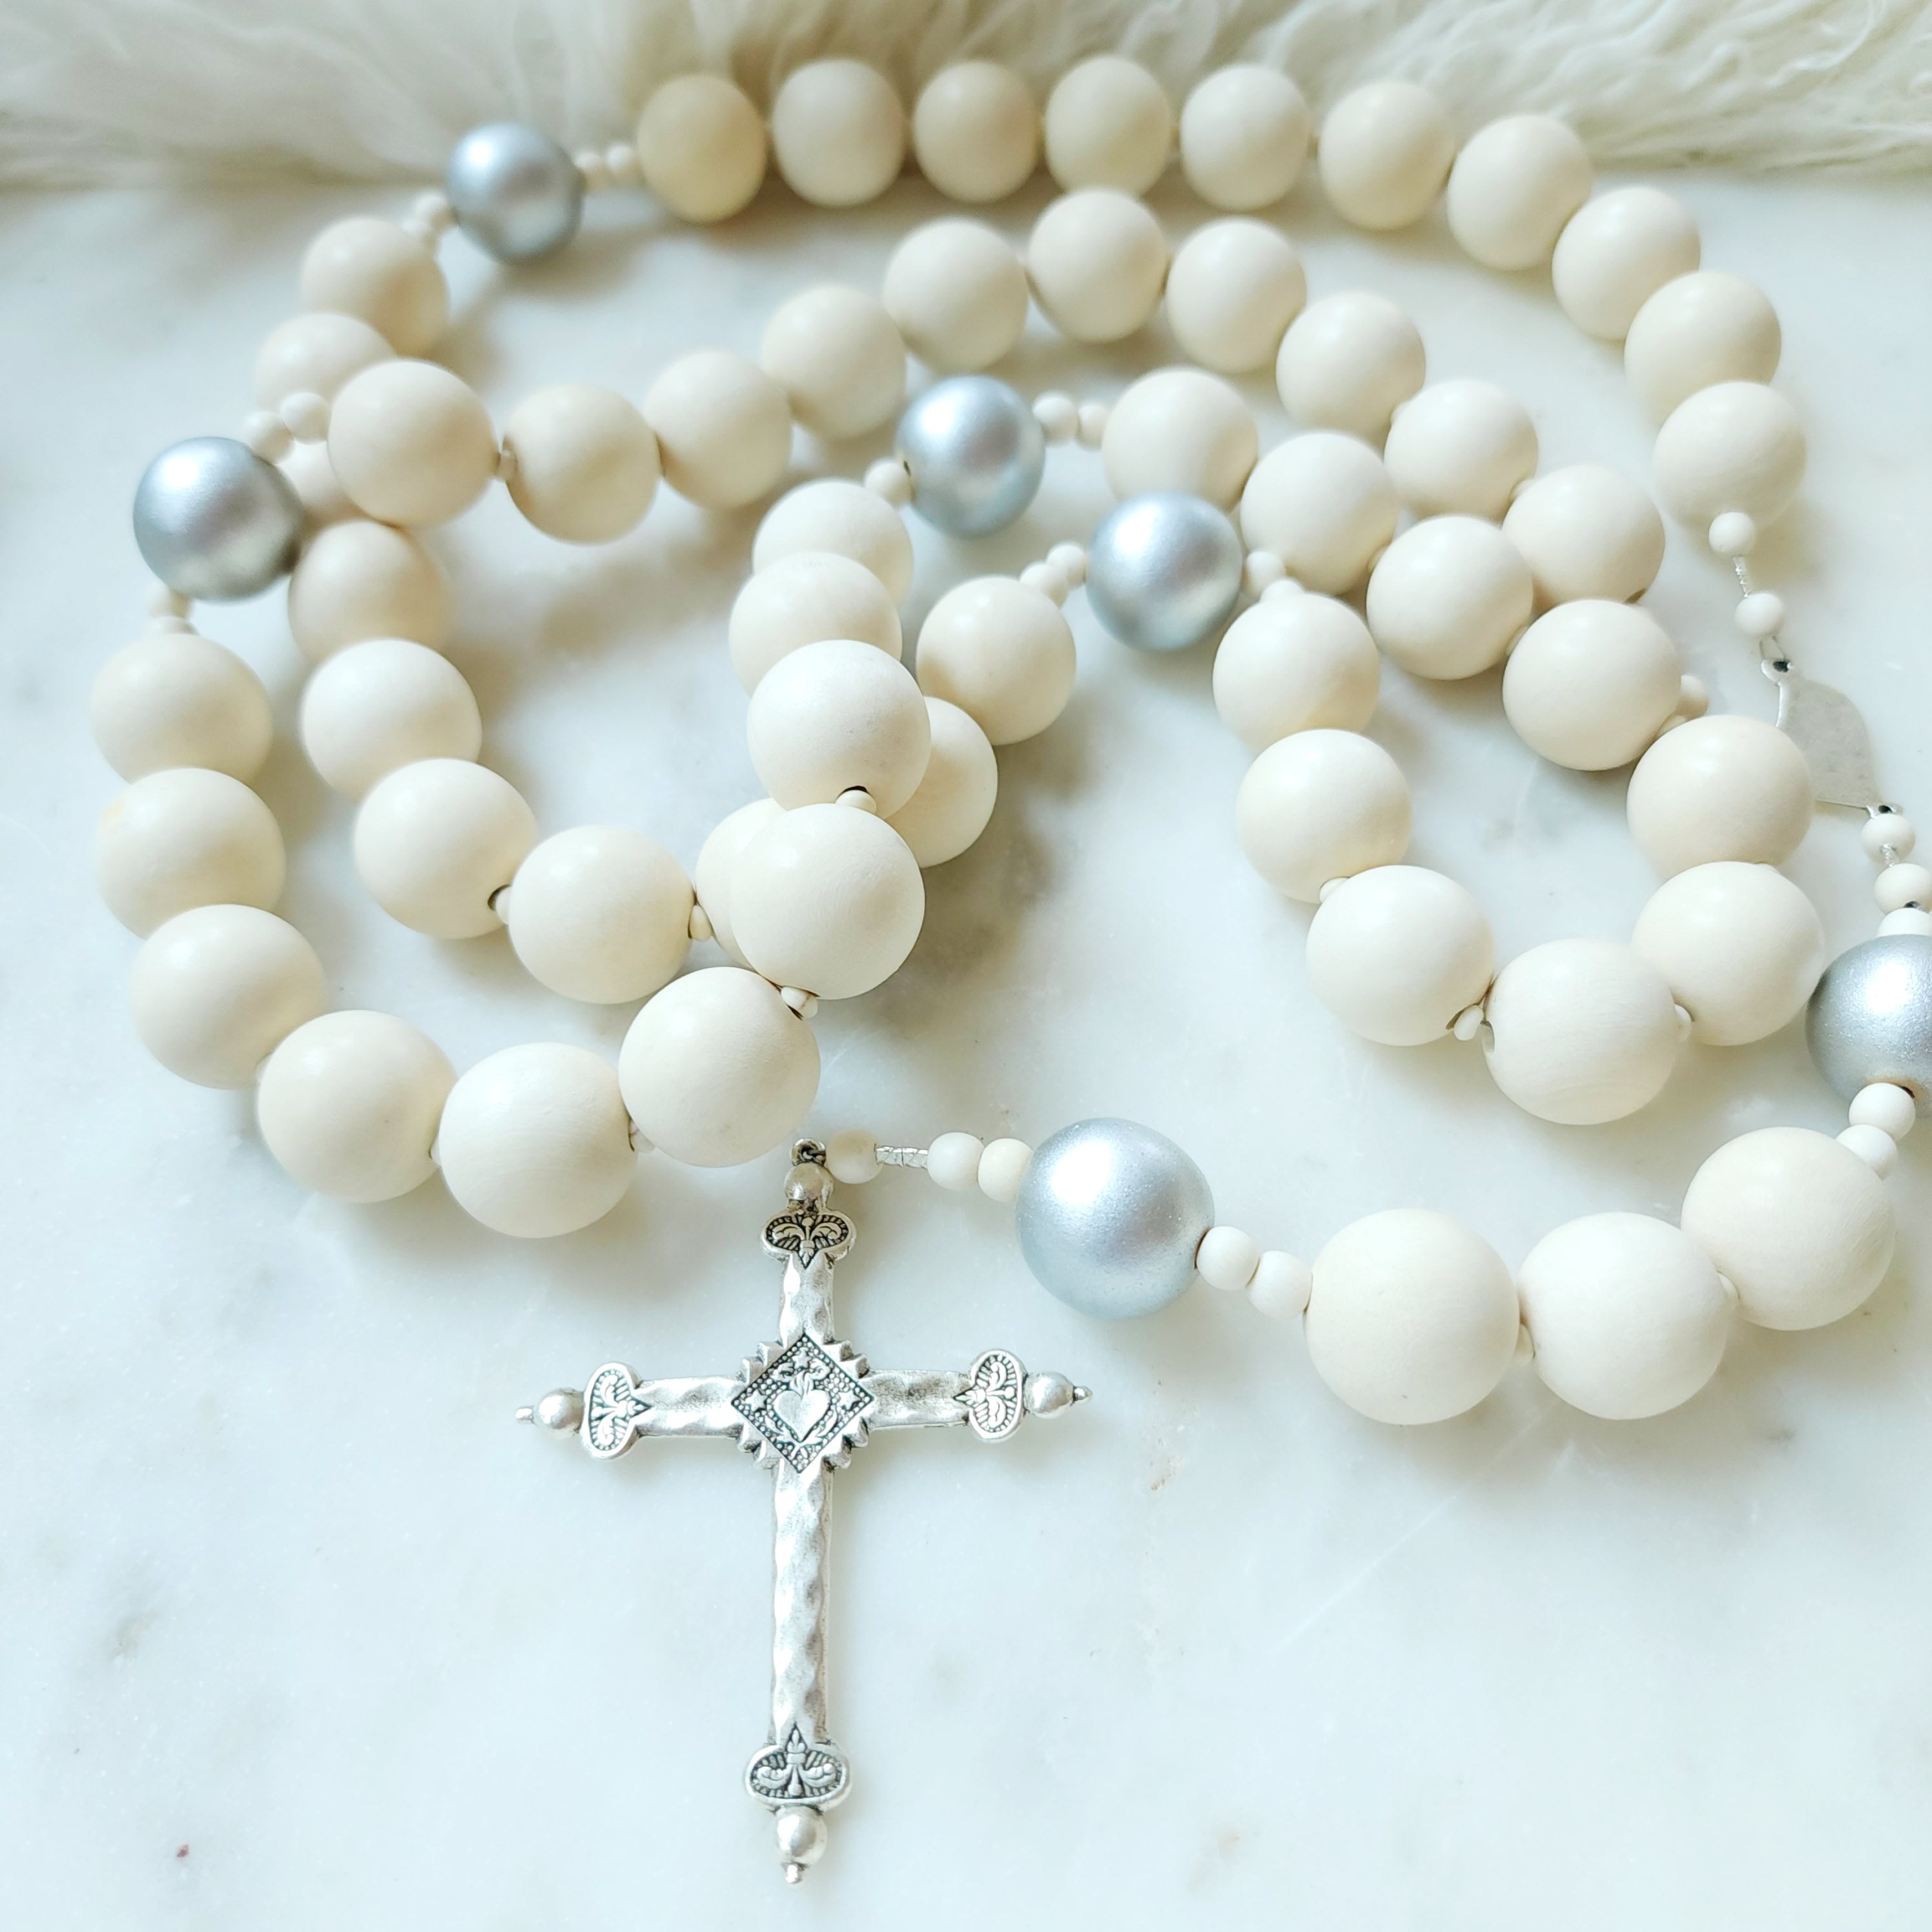 Praise Worthy Home Rosary (limited)